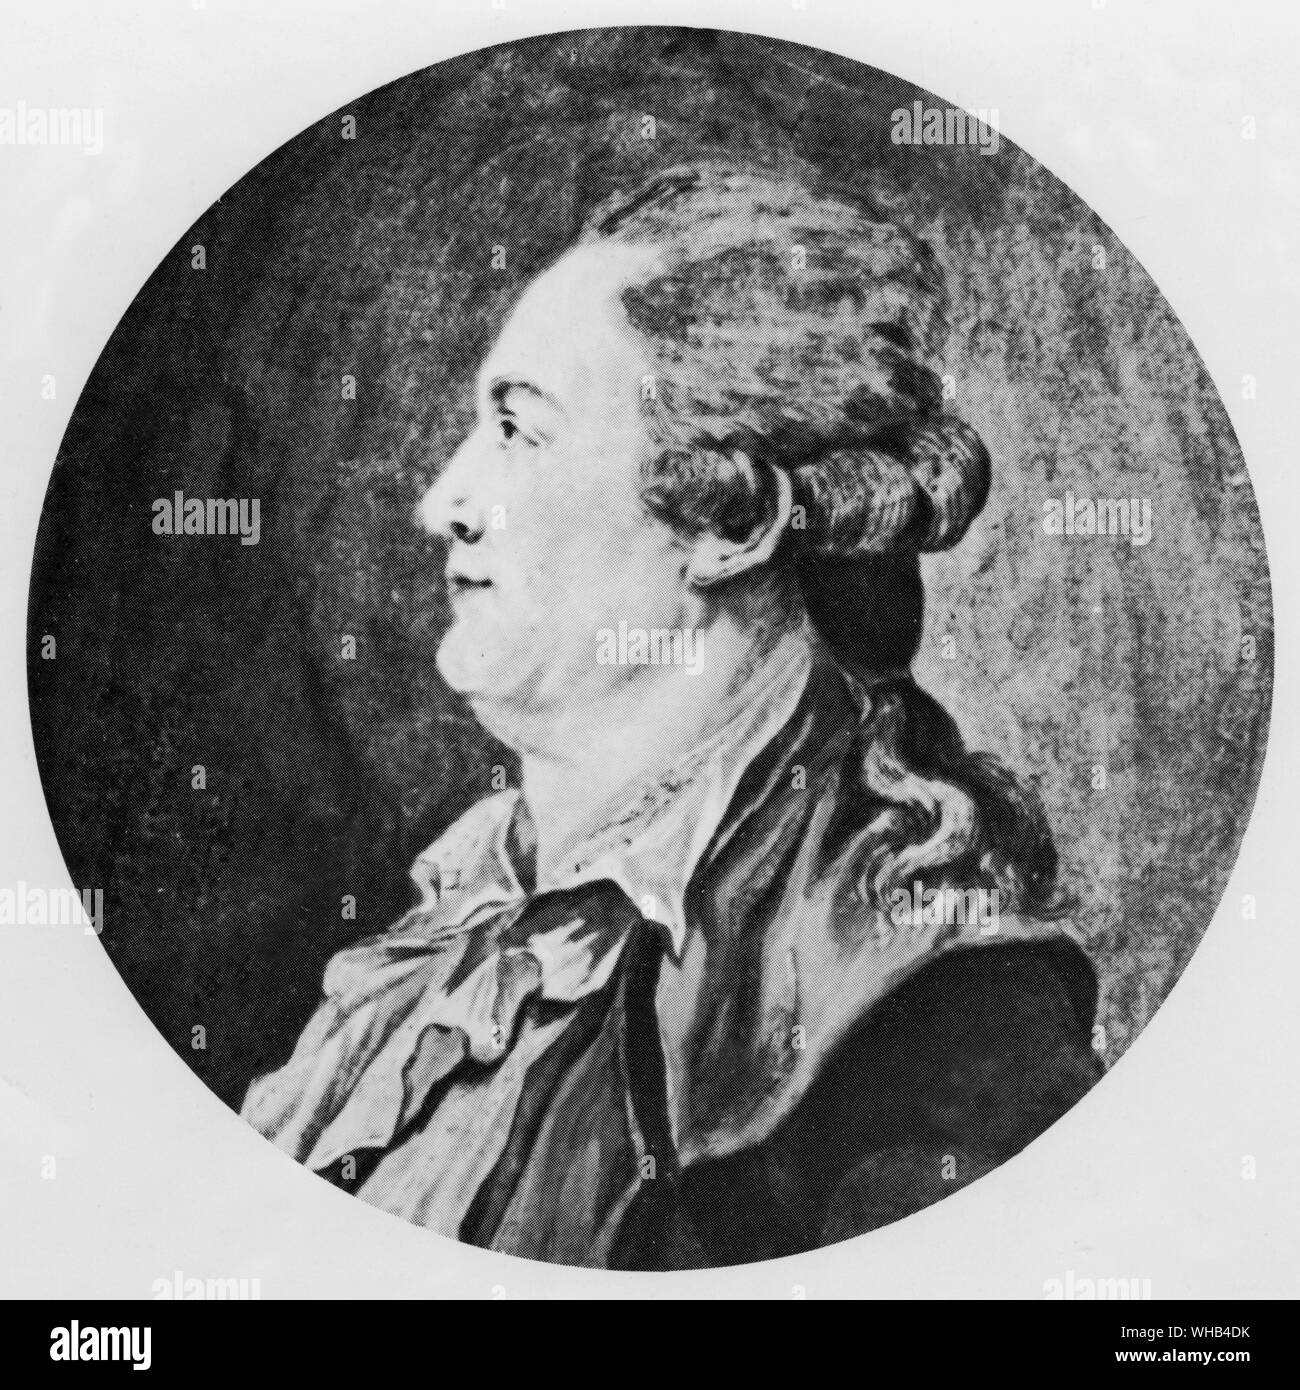 Friedrich Anton Mesmer - the originator of mesmerism - Franz Anton Mesmer (May 23, 1734 - March 5, 1815) discovered what he called magnétisme animal (animal magnetism) and others often called mesmerism. The evolution of Mesmer's ideas and practices led James Braid (1795-1860) to develop hypnosis in 1842, his name being the route of the English verb 'mesmerize'.. Stock Photo